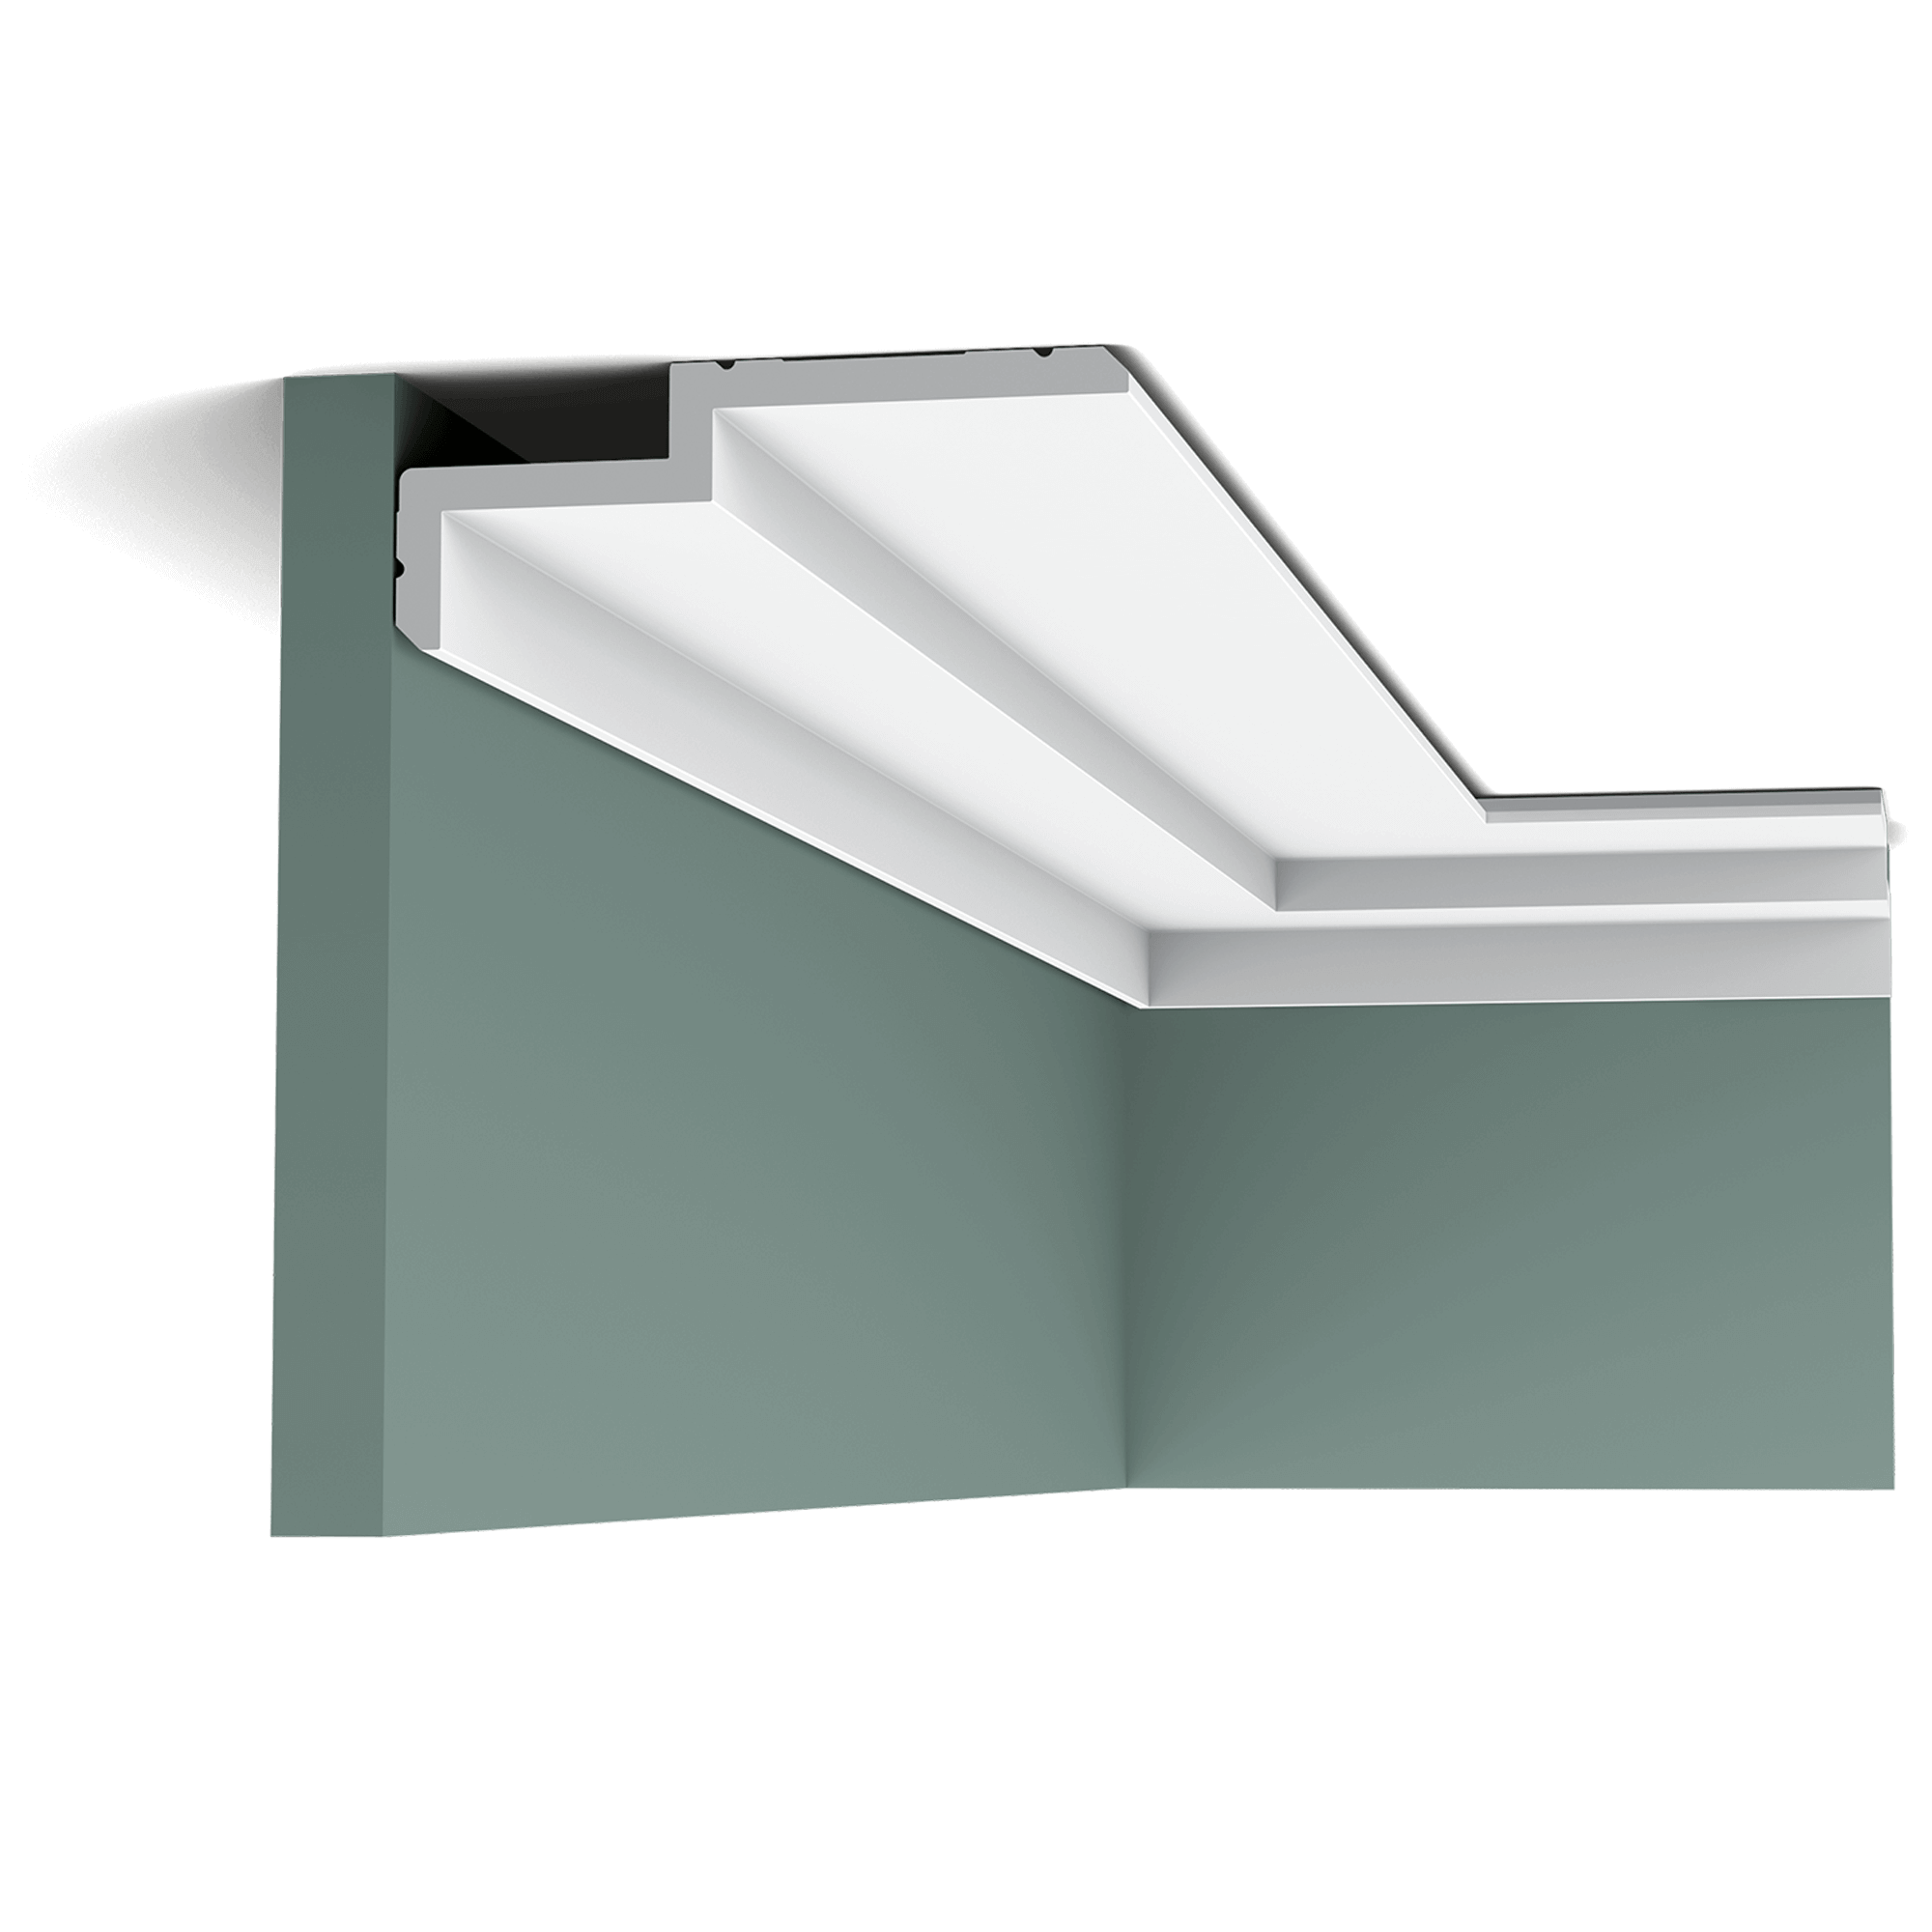 c391 cornice moulding 2583 A clean, modern profile from the Steps range. Here we fix the largest section to the ceiling, making the space seem wider. The angled corners above and below provide additional subtle shadow lines. Designed by Orio Tonini.